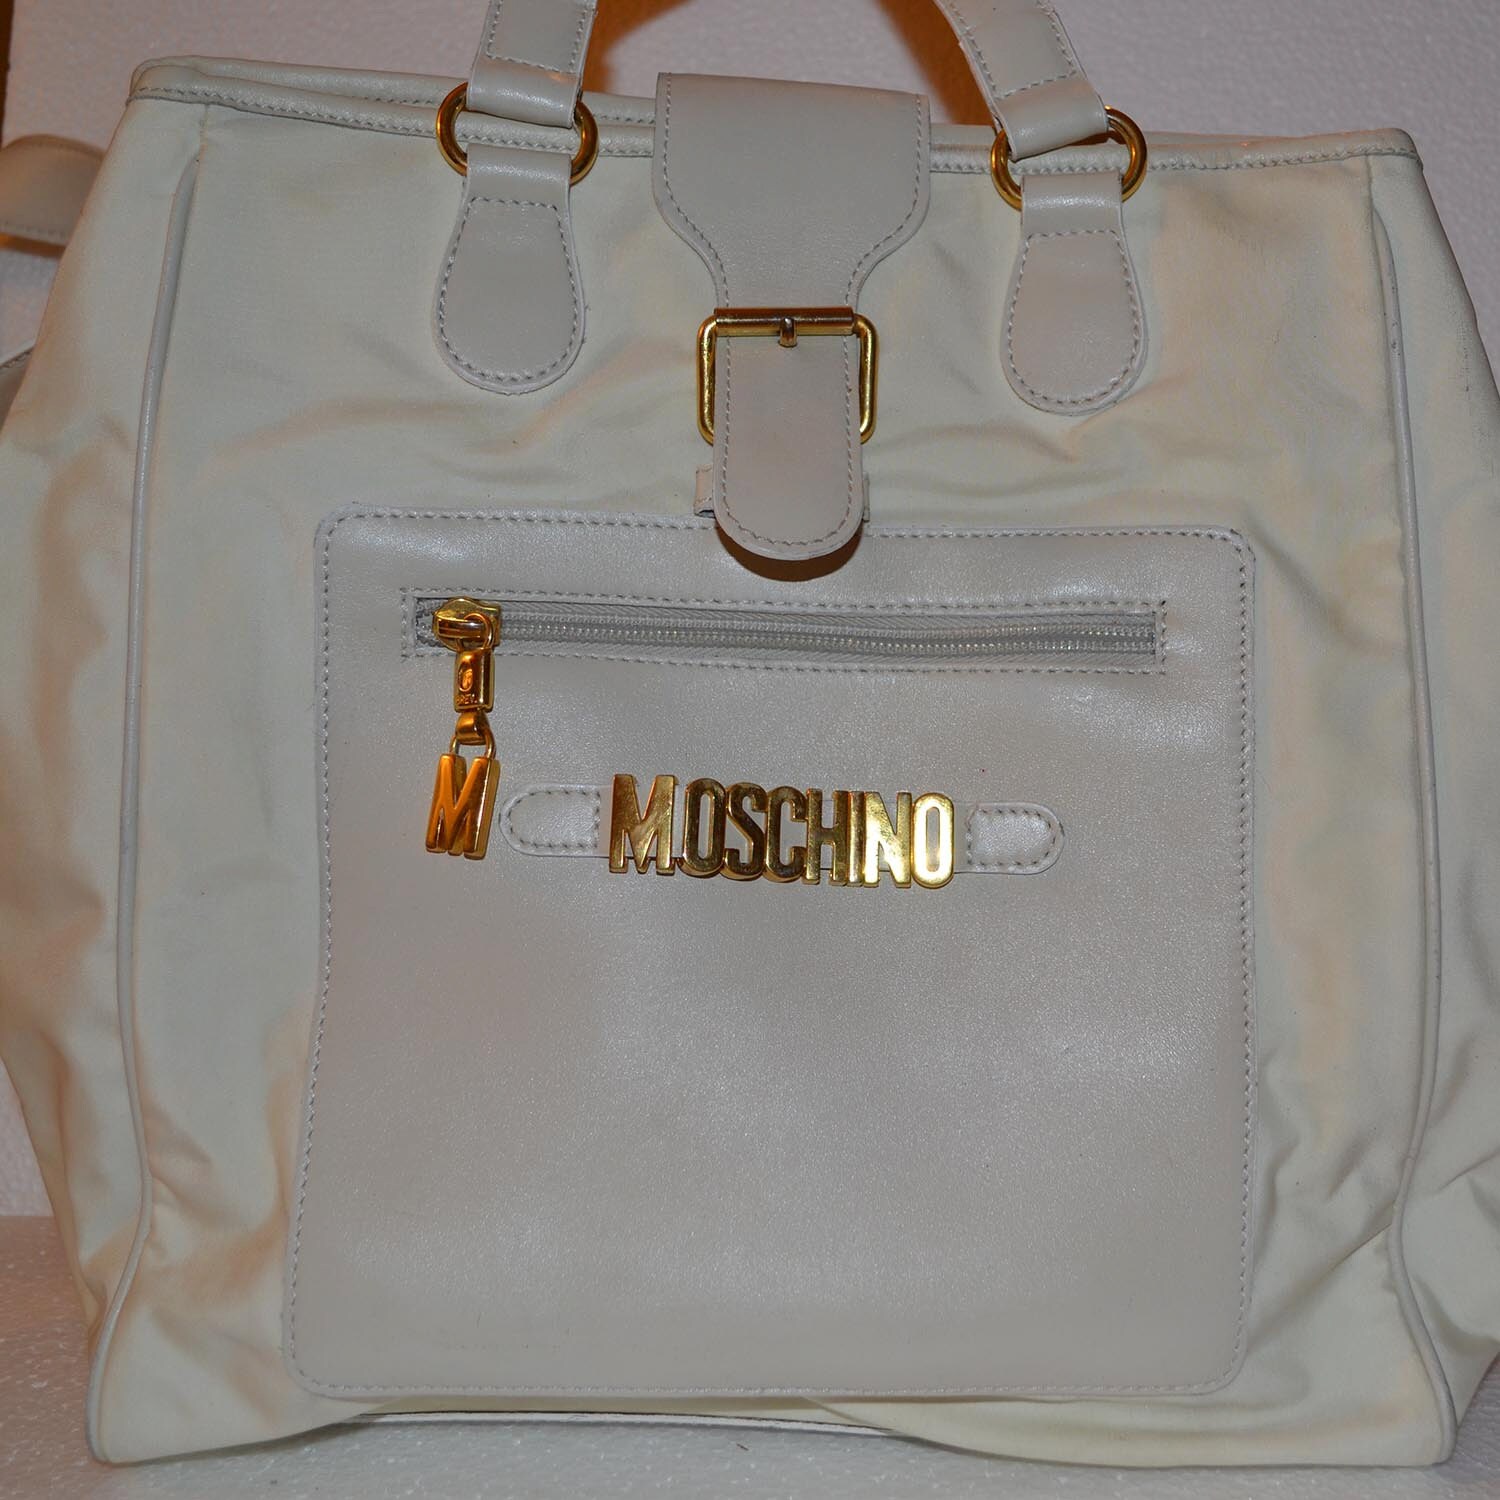 MOSCHINO REDWALL handbag authentic in off white color/ vintage | Etsy